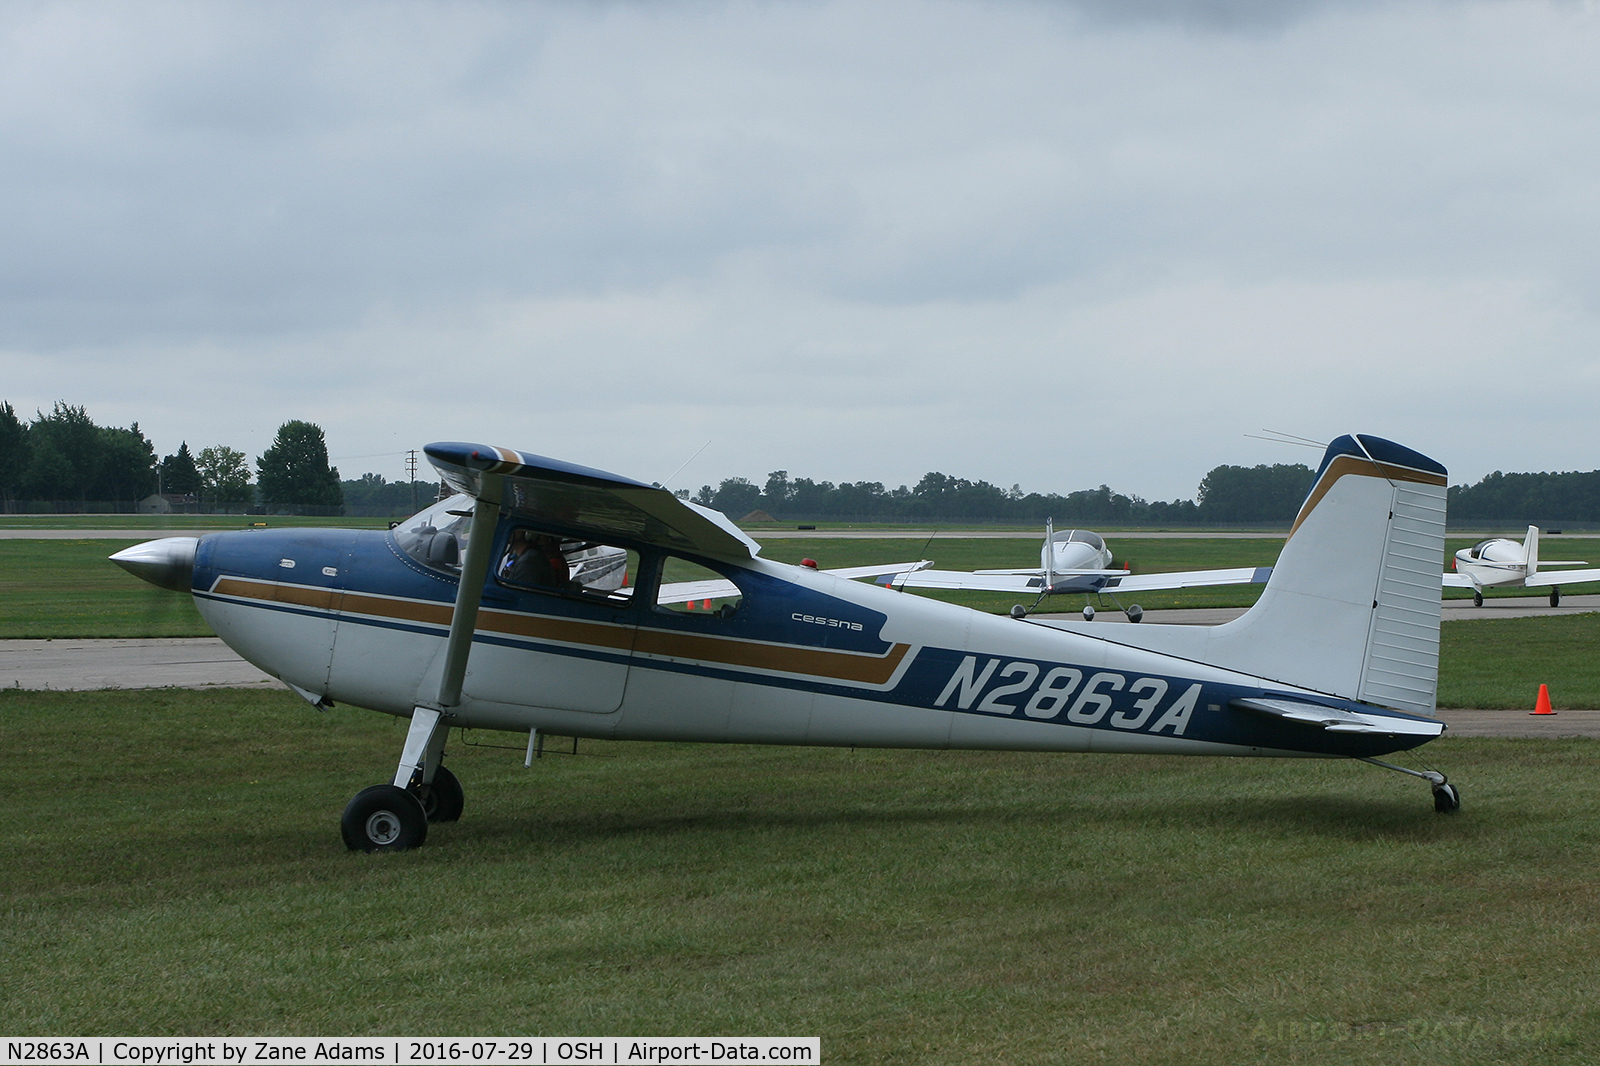 N2863A, 1953 Cessna 180 C/N 30063, At the 2016 EAA AirVenture - Oshkosh, Wisconsin